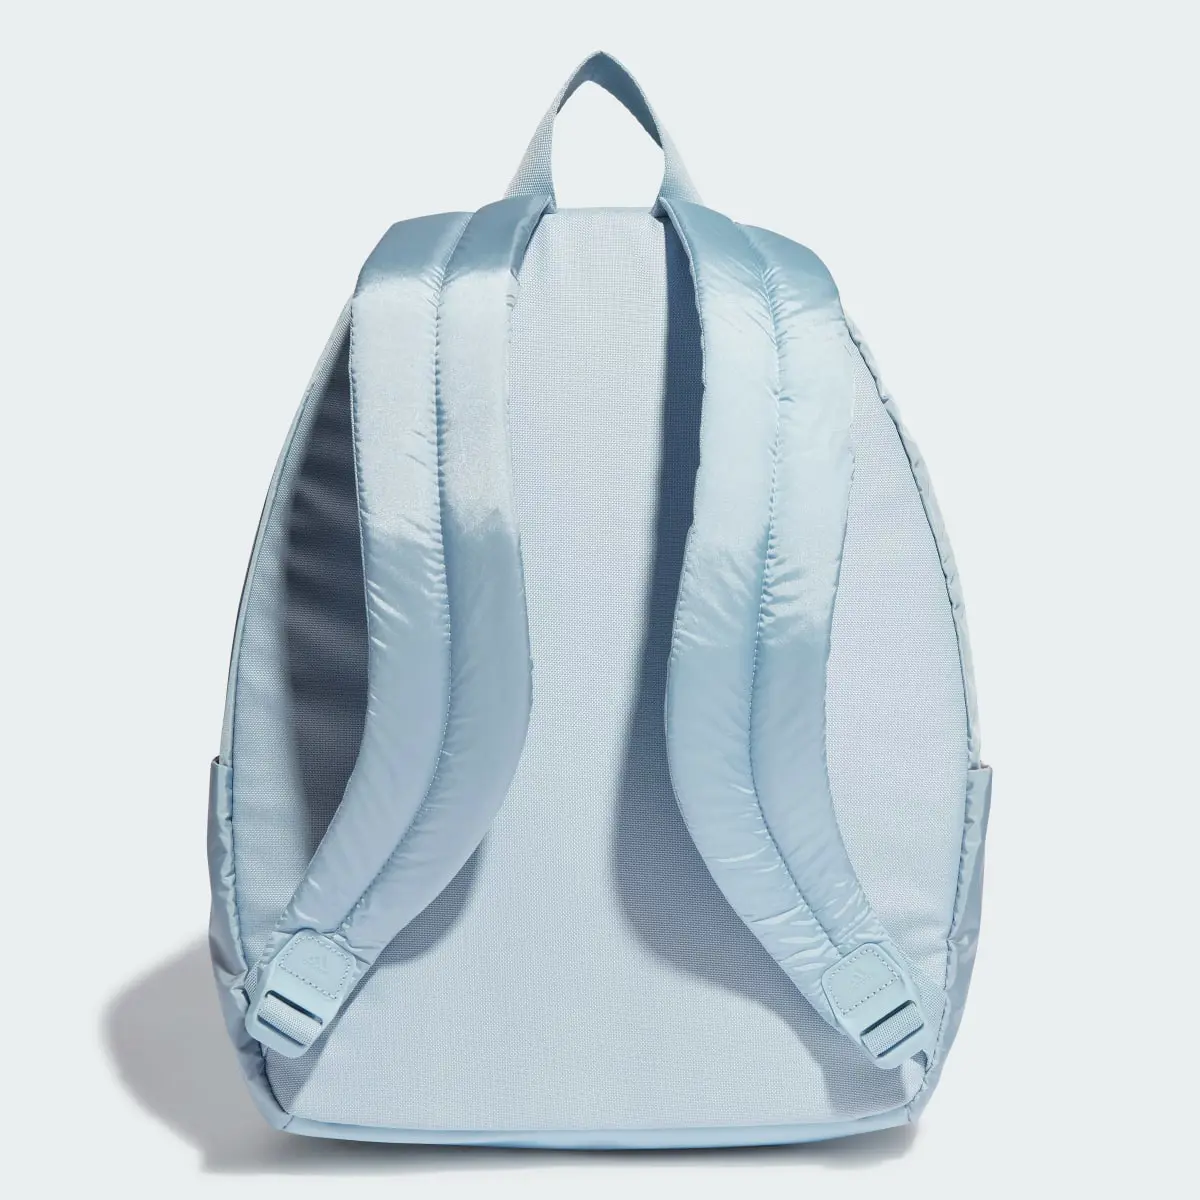 Adidas Classic Gen Z Backpack. 3